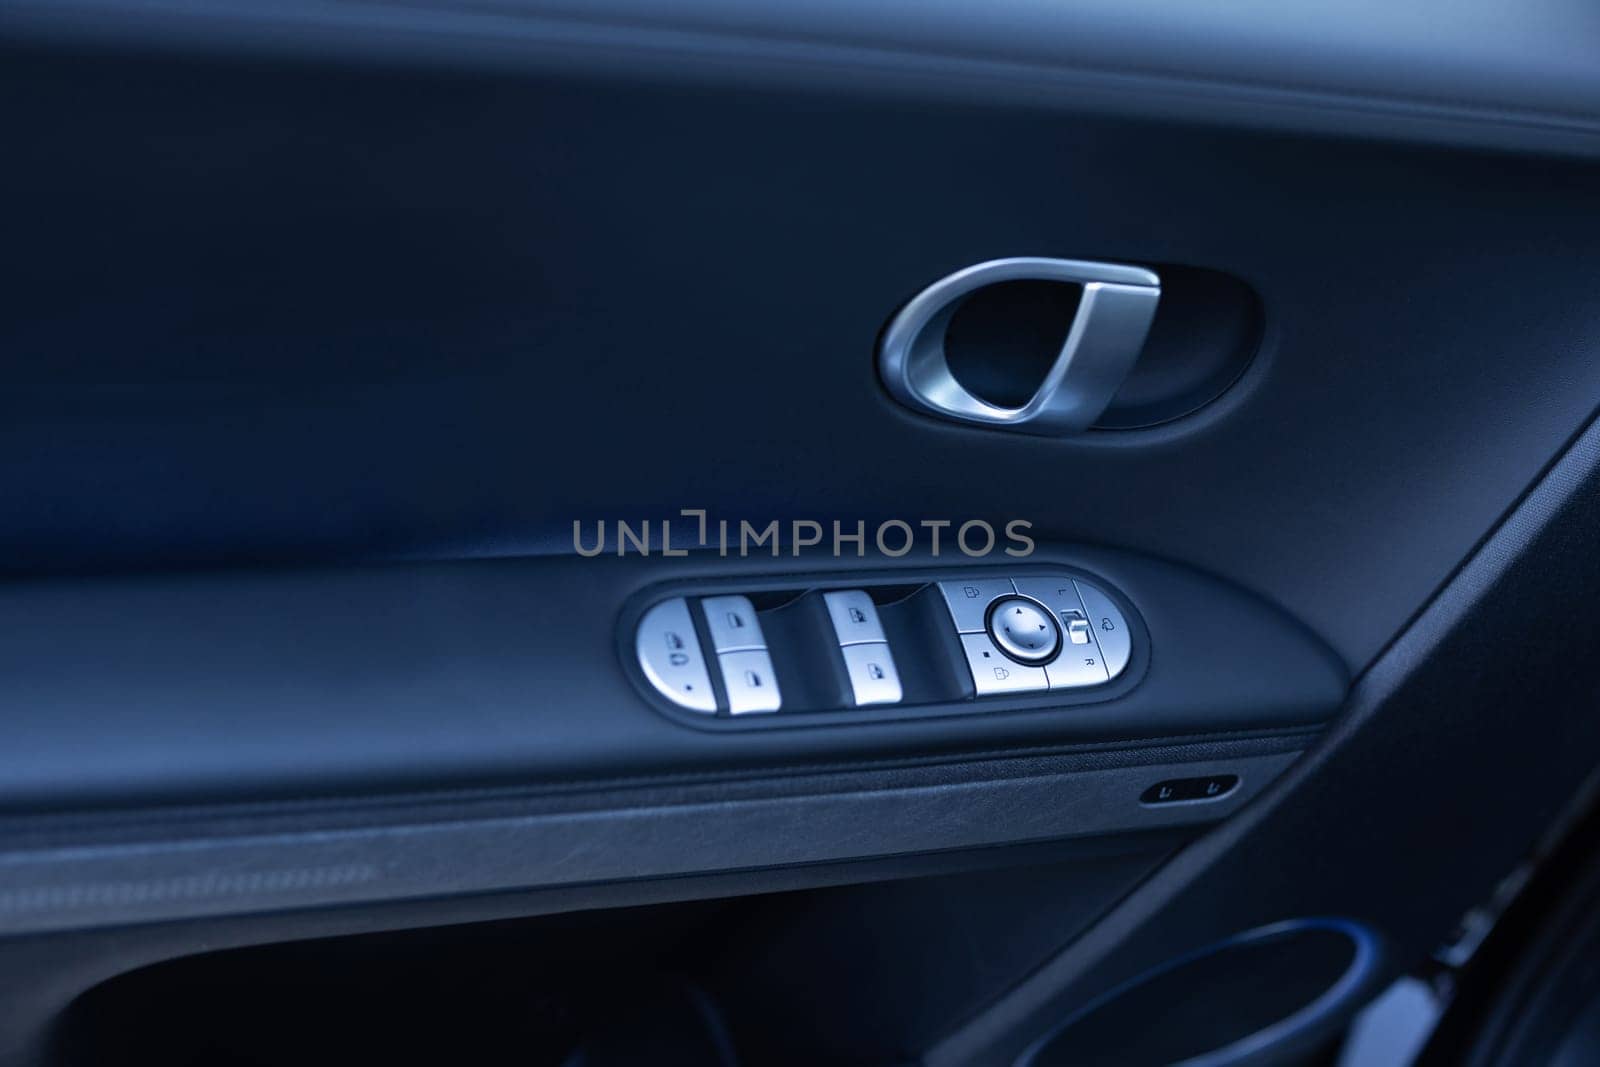 Car window controls. Door handle with power window control. Window control buttons in modern luxury electric car. Car leather interior details of door handle with windows controls and adjustments.